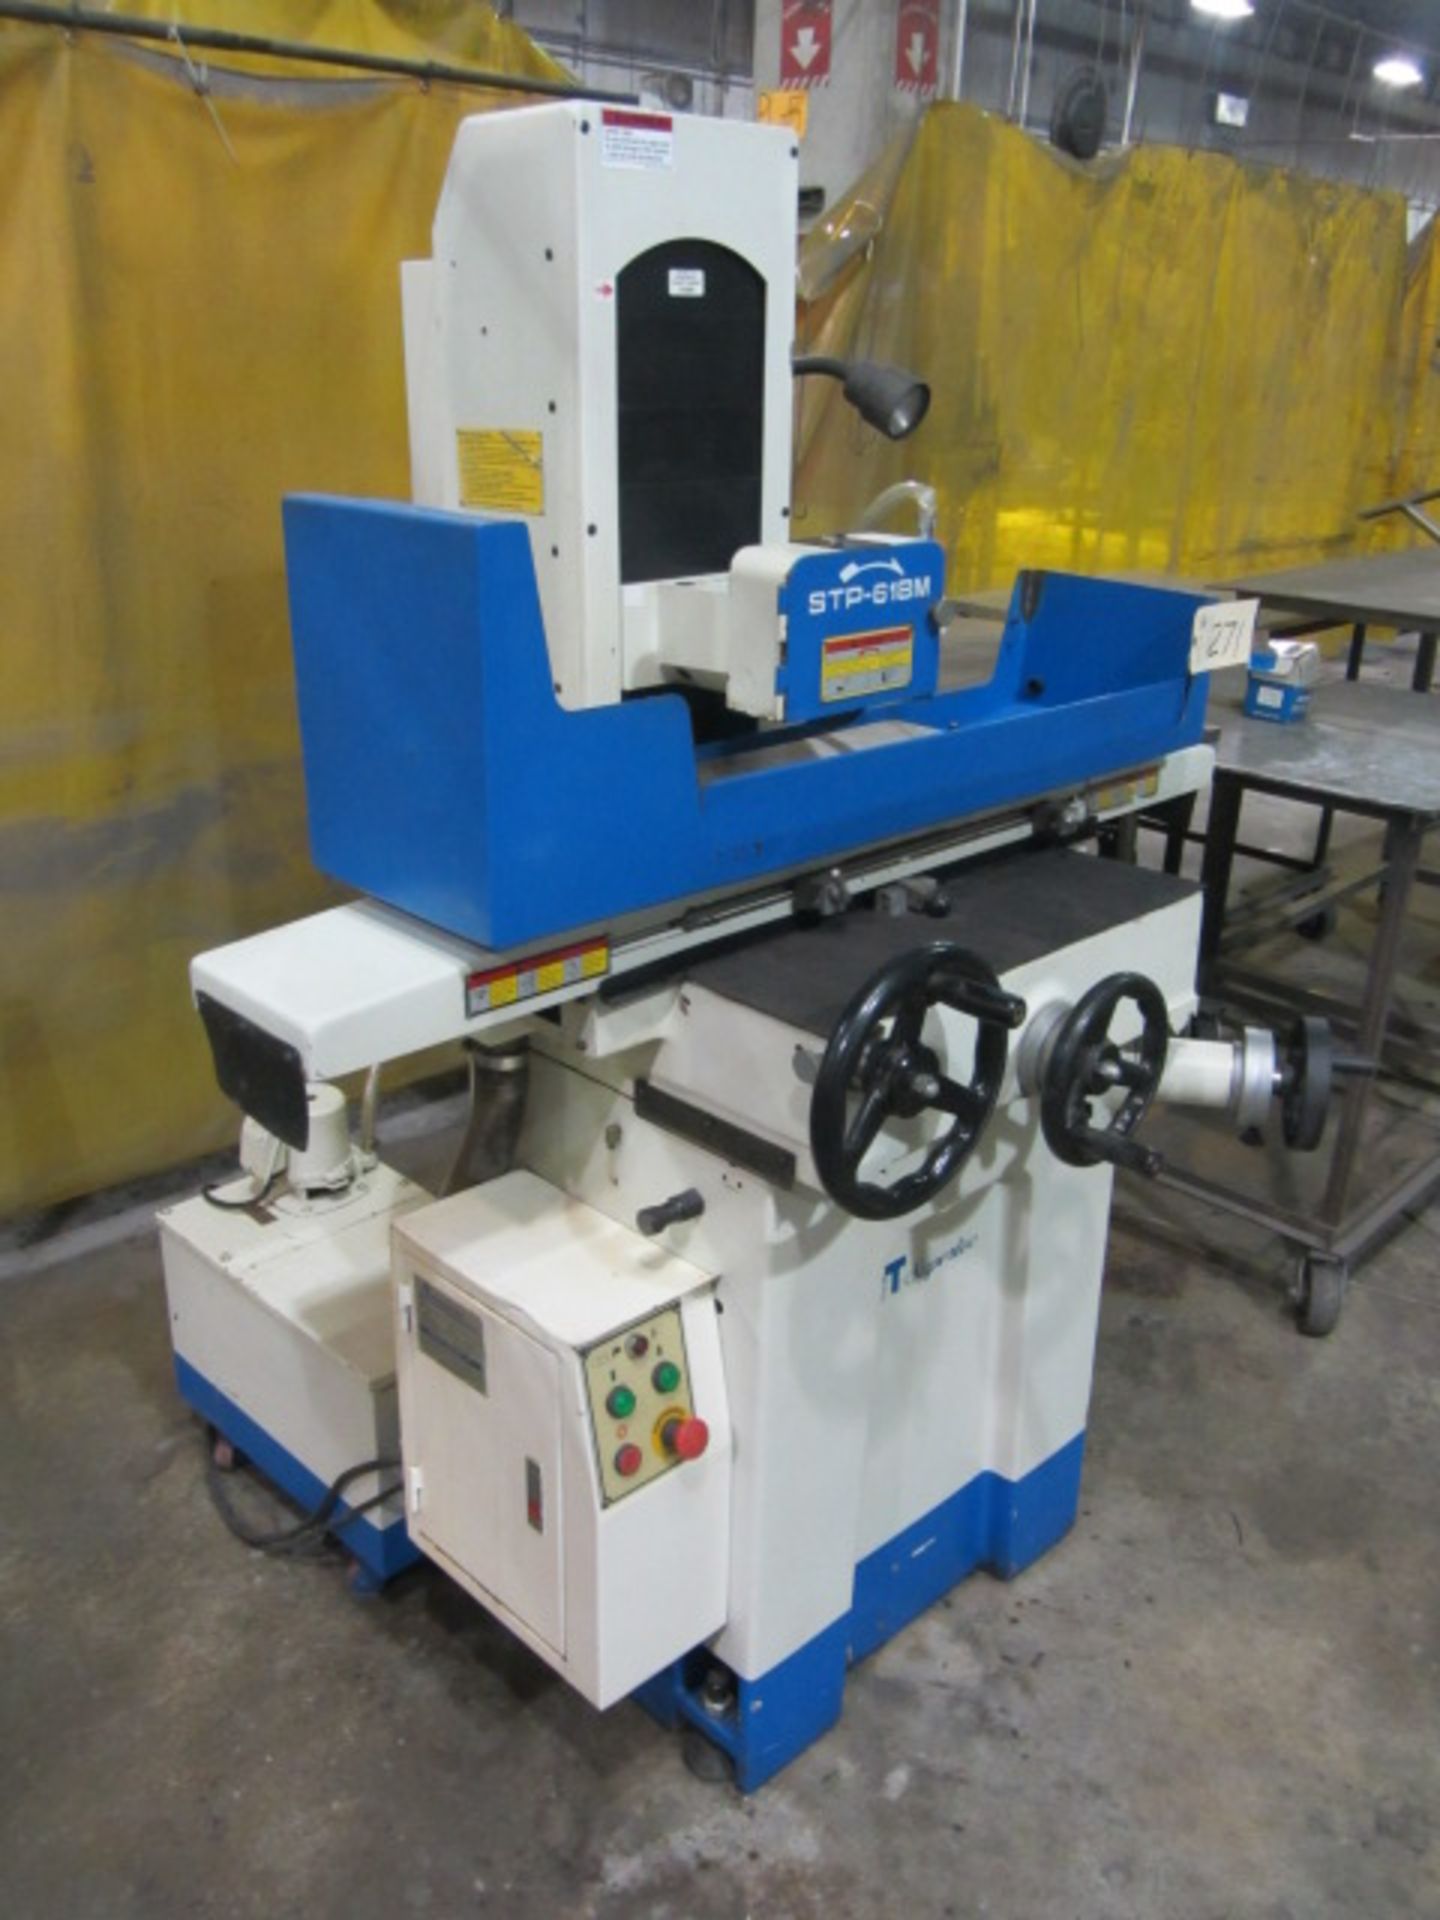 Supertec Model STP-618M 6'' x 18'' Automatic Surface Grinder with Kanetsu Permanent Magnetic - Image 4 of 5